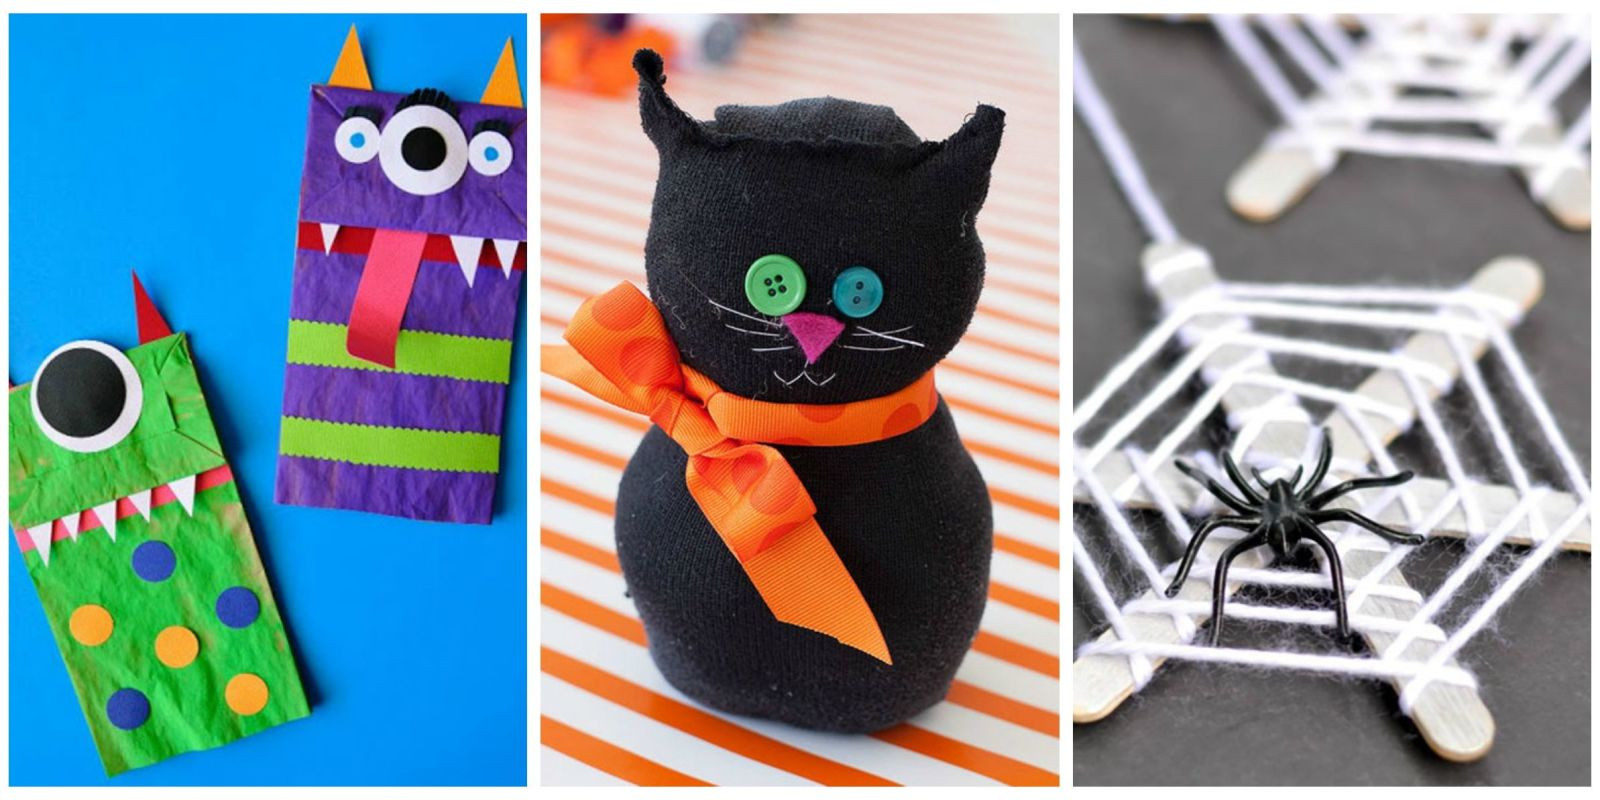 Halloween Crafting Ideas For Kids
 26 Easy Halloween Crafts for Kids Best Family Halloween